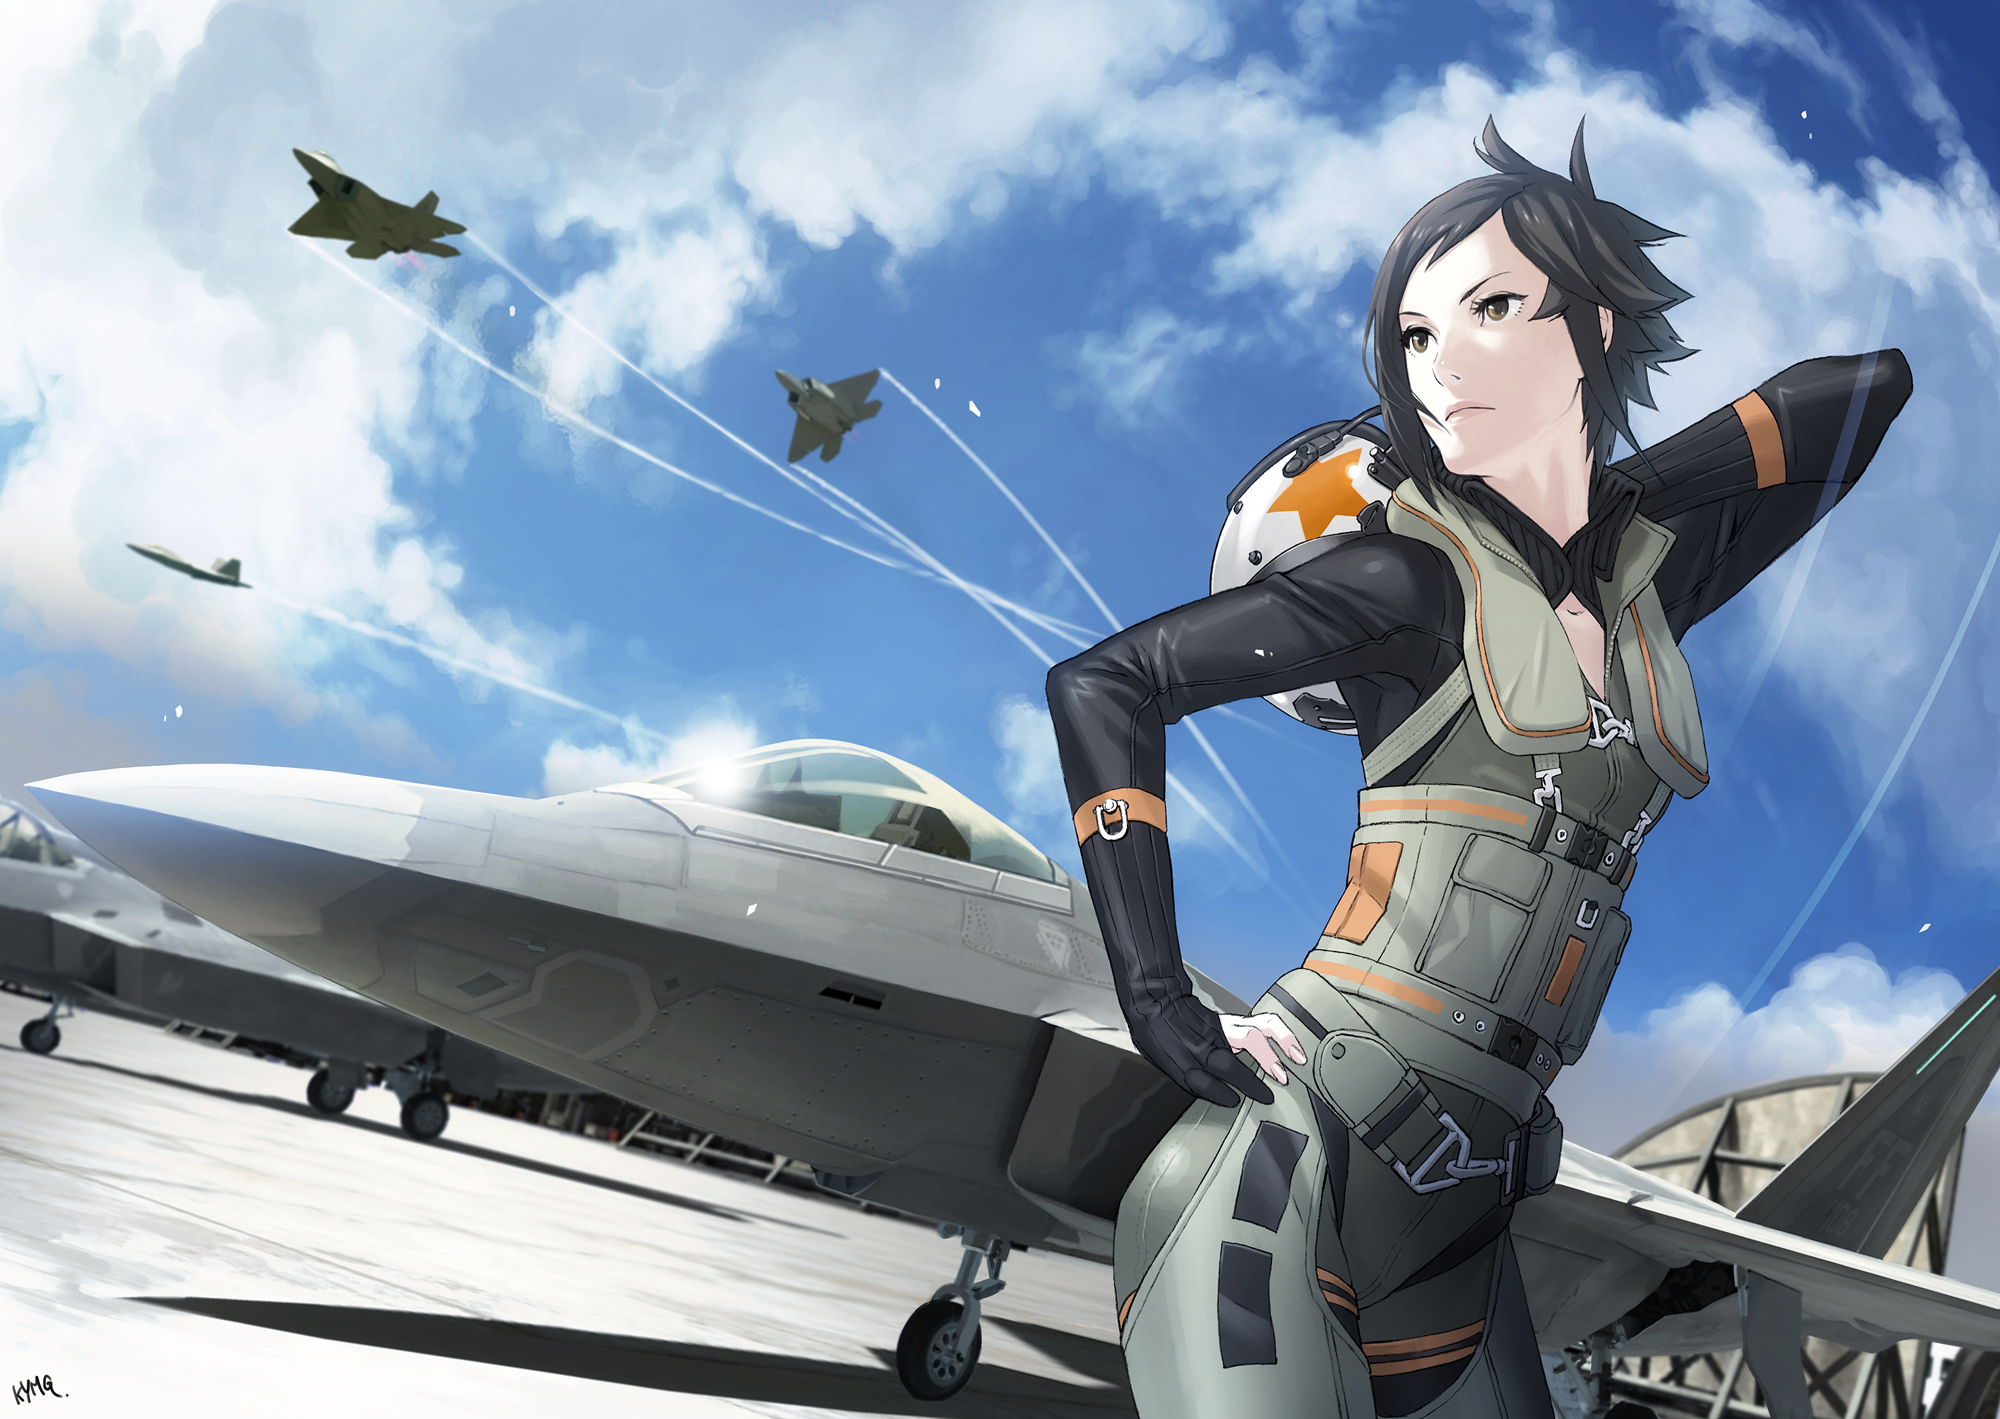 ace, Combat, Game, Jet, Airplane, Aircraft, Fighter, Plane